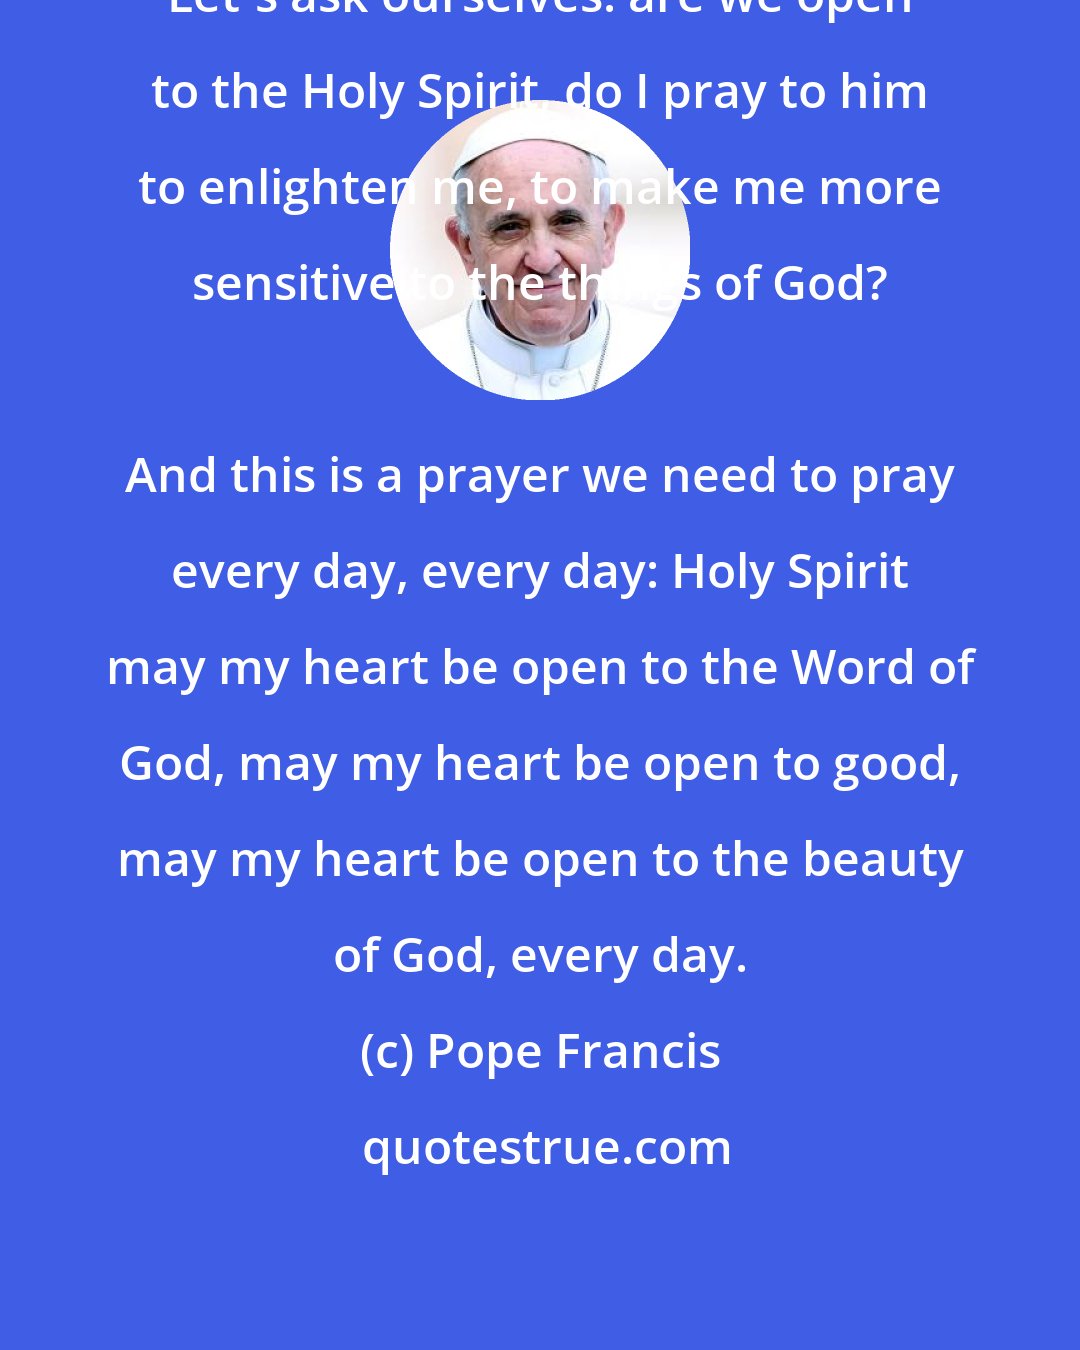 Pope Francis: Let's ask ourselves: are we open to the Holy Spirit, do I pray to him to enlighten me, to make me more sensitive to the things of God? 
 
 And this is a prayer we need to pray every day, every day: Holy Spirit may my heart be open to the Word of God, may my heart be open to good, may my heart be open to the beauty of God, every day.